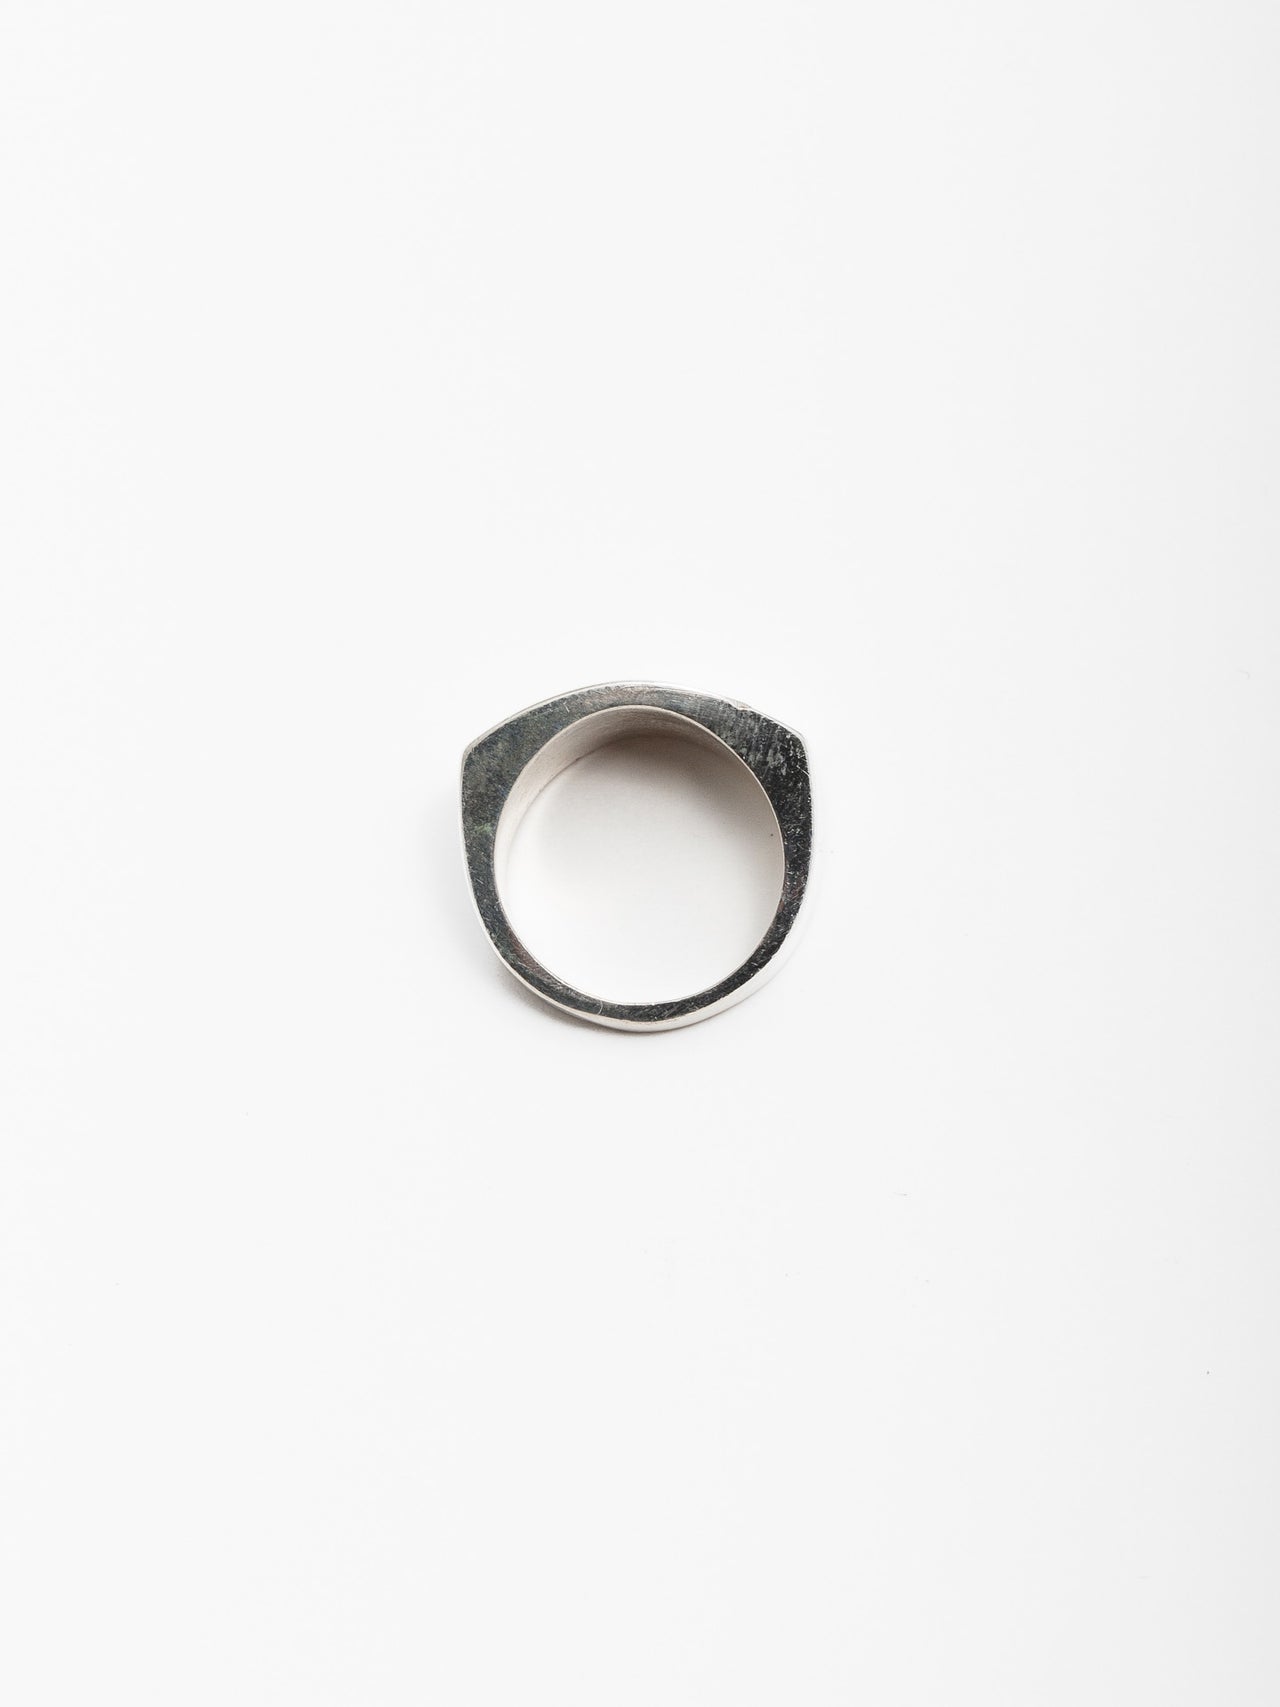 Sterling Silver ID Ring pictured from above. Overview of band. Light grey background.